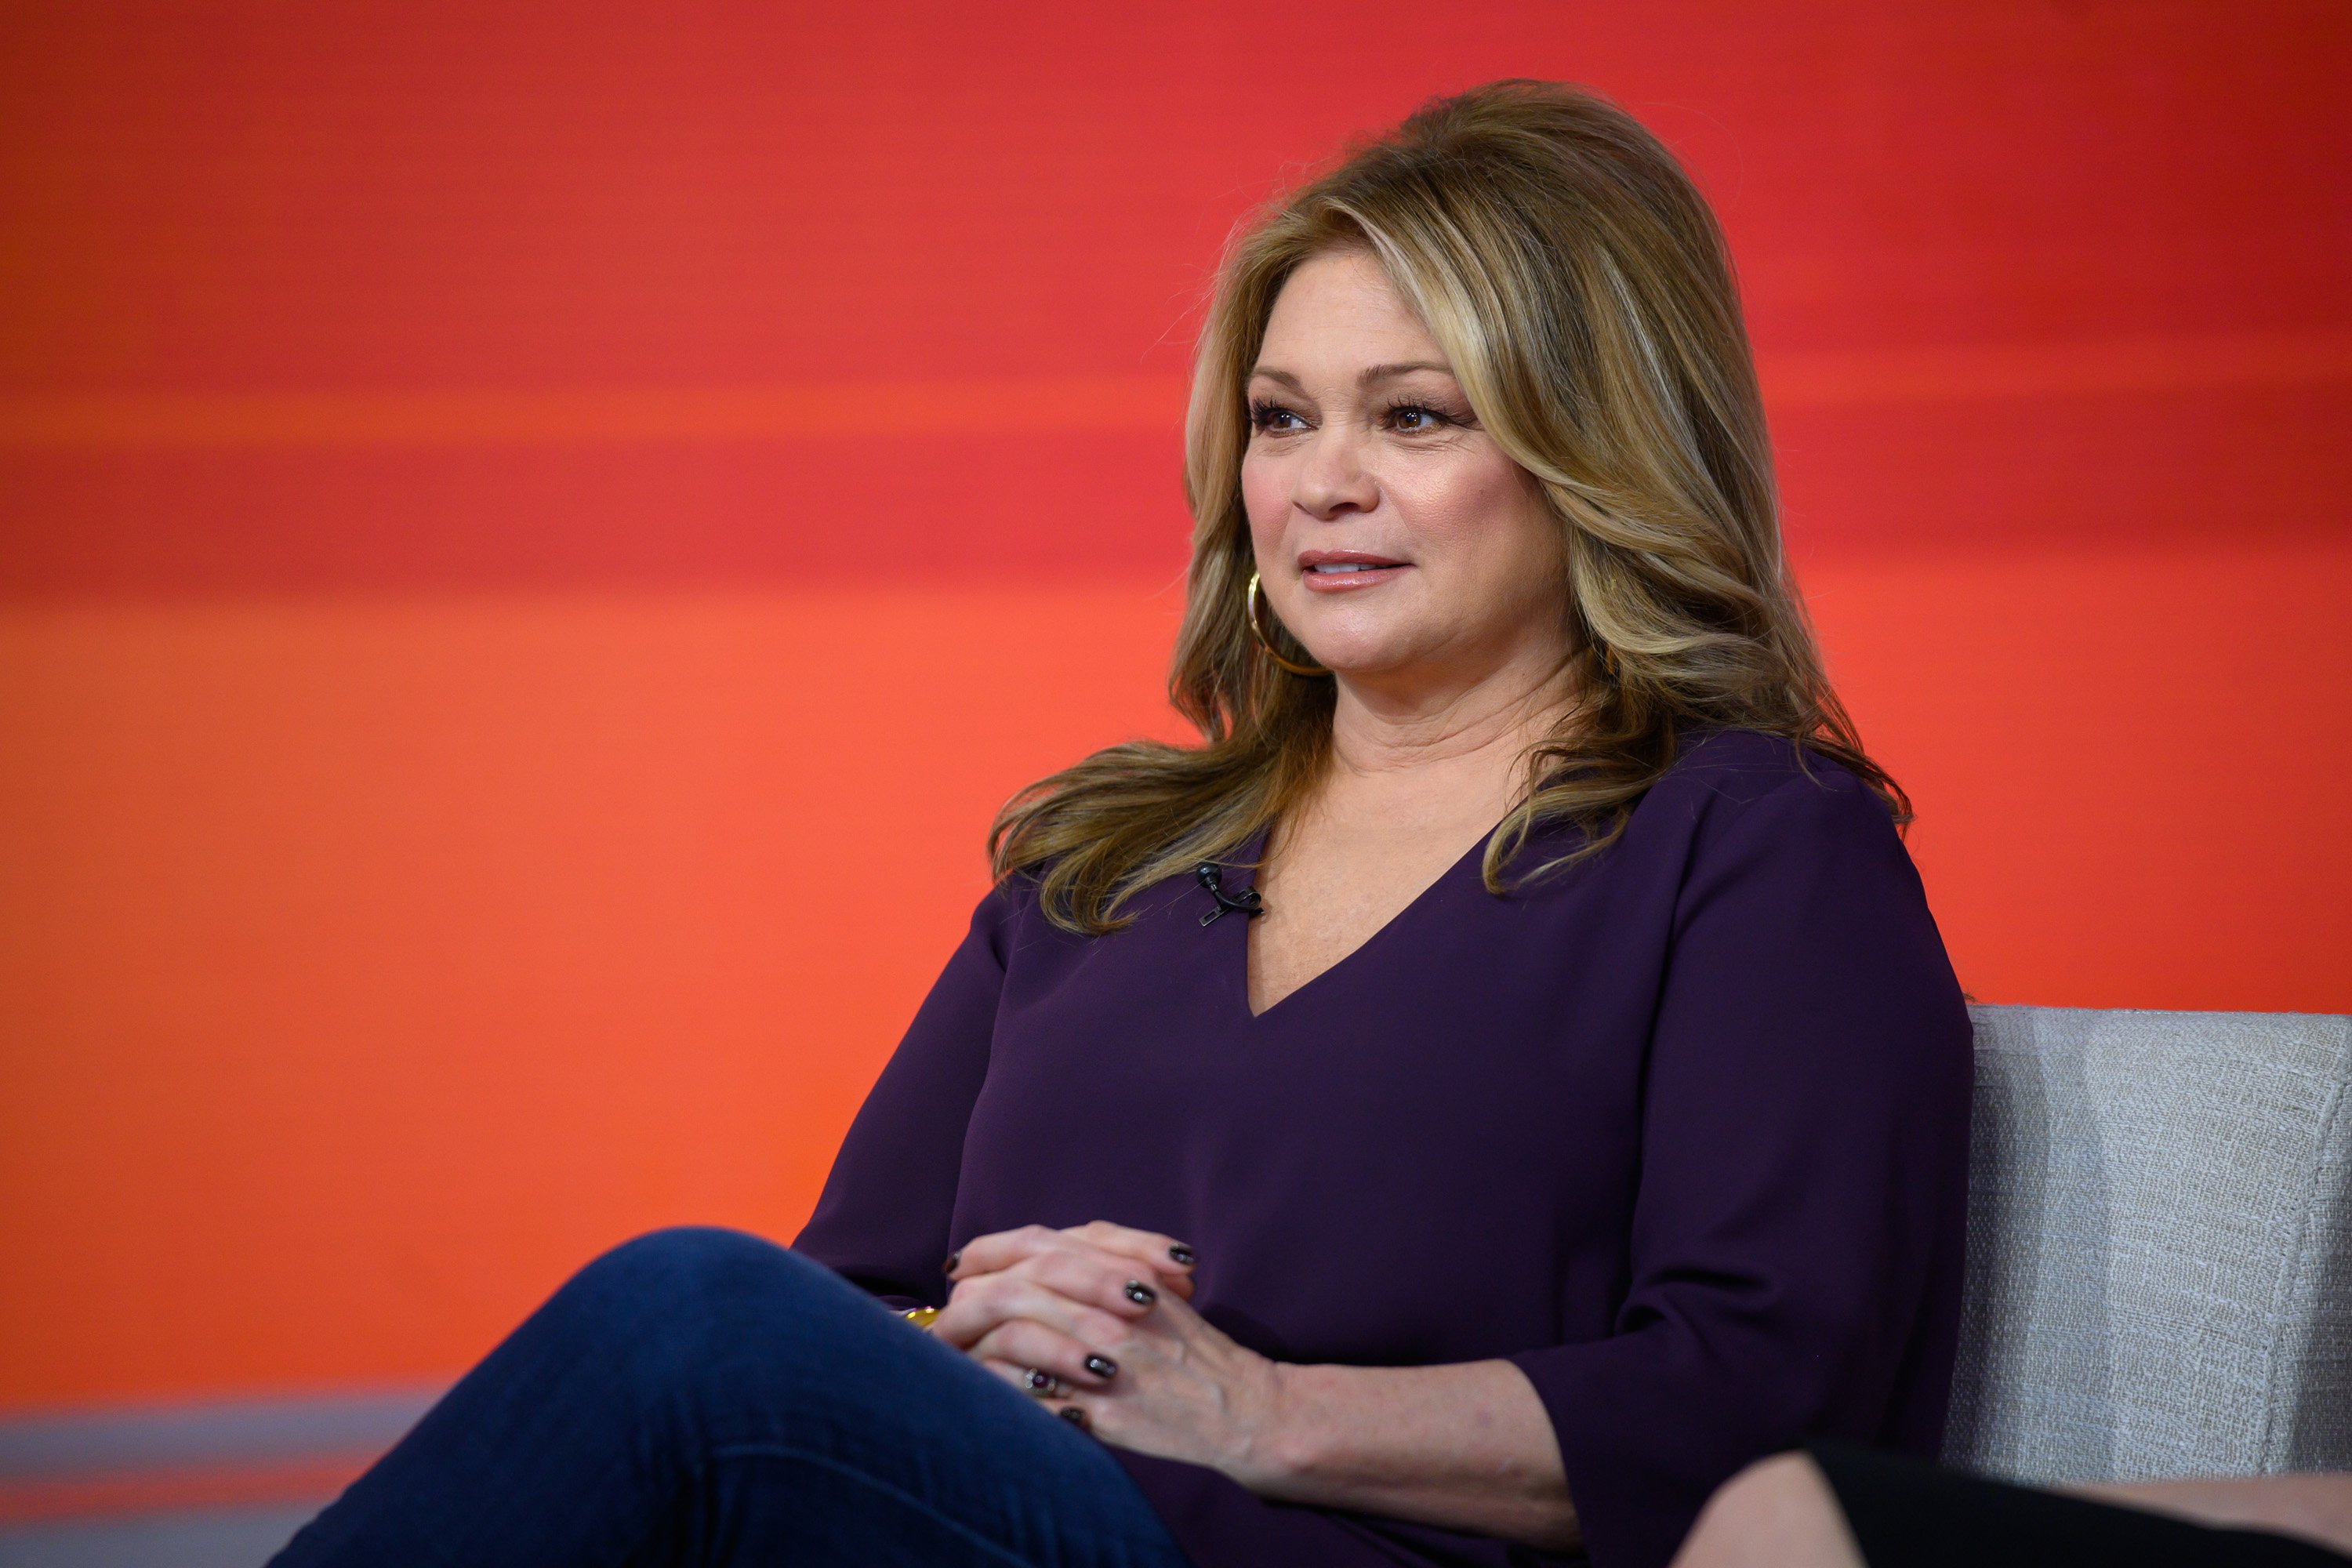 Valerie Bertinelli on Friday, January 24, 2020 | Source: Getty Images